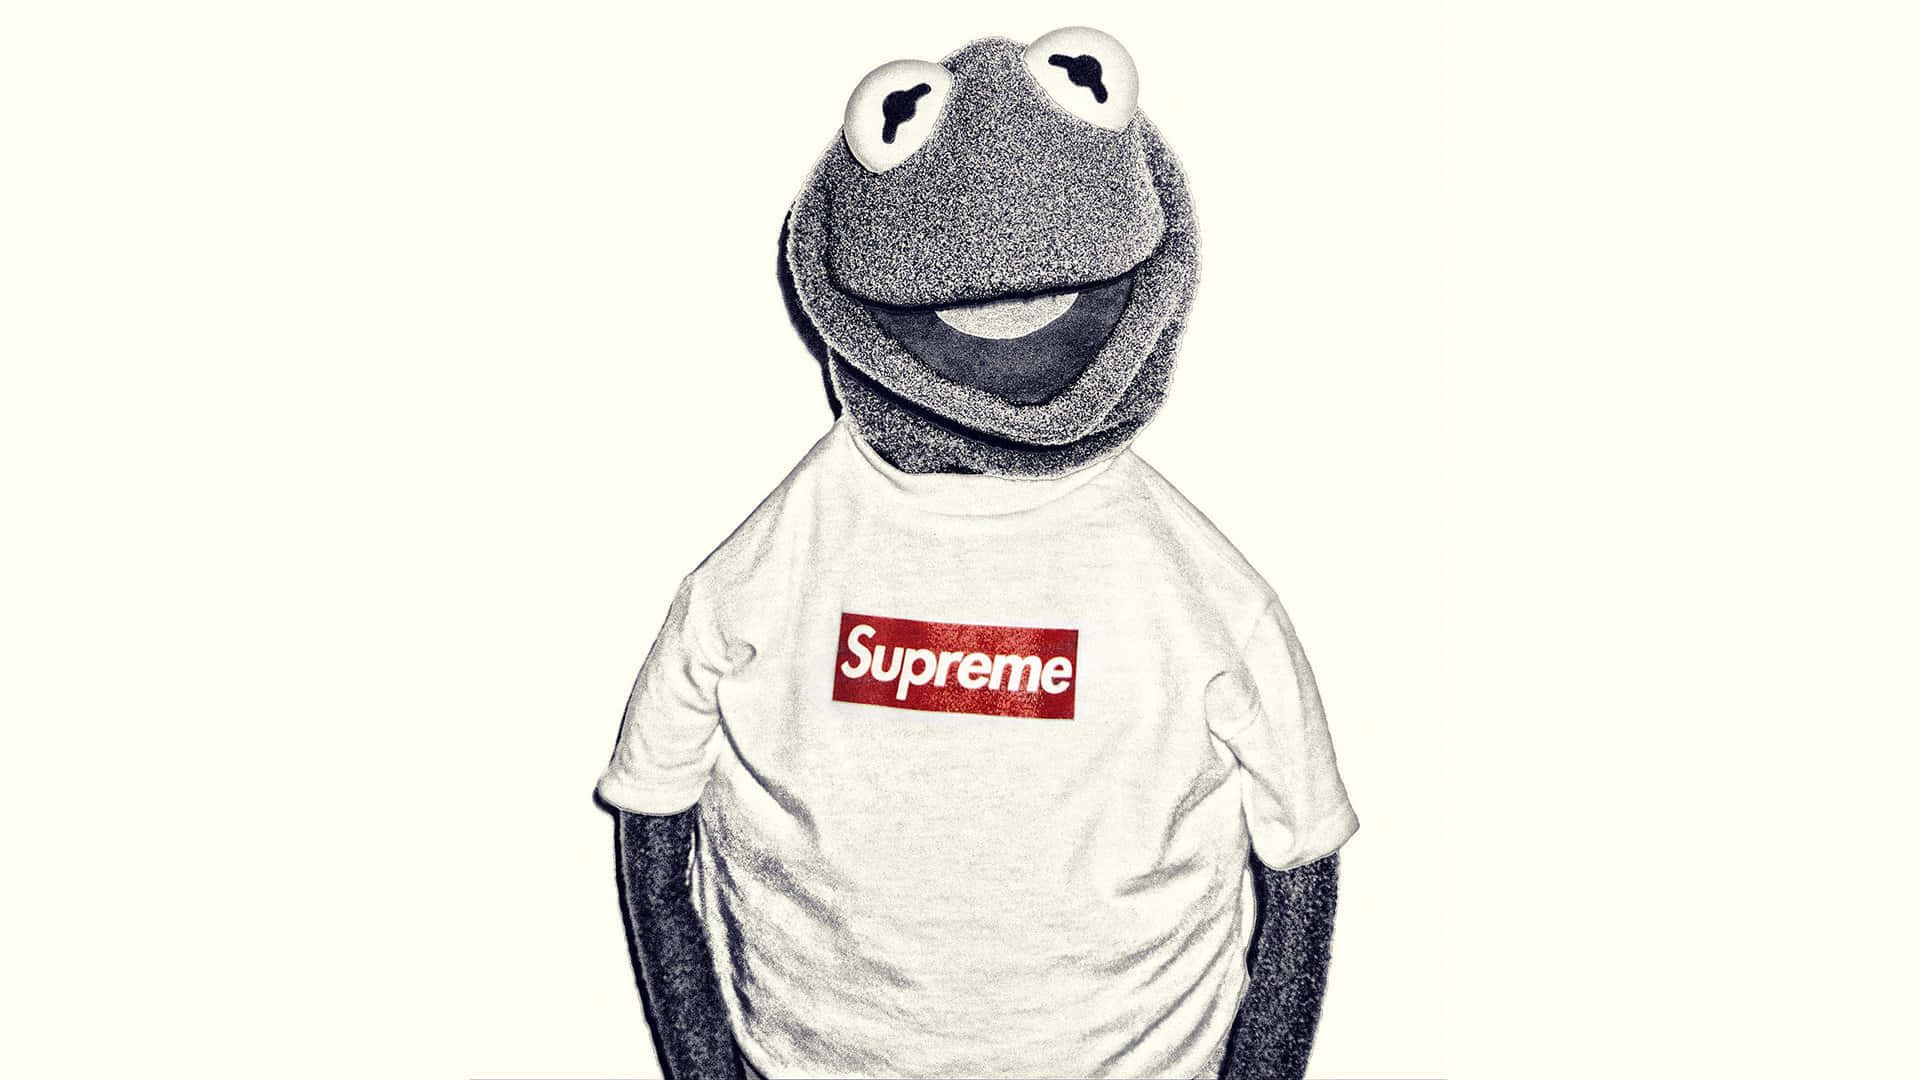 Bring Style to Any Look with Supreme Clothing